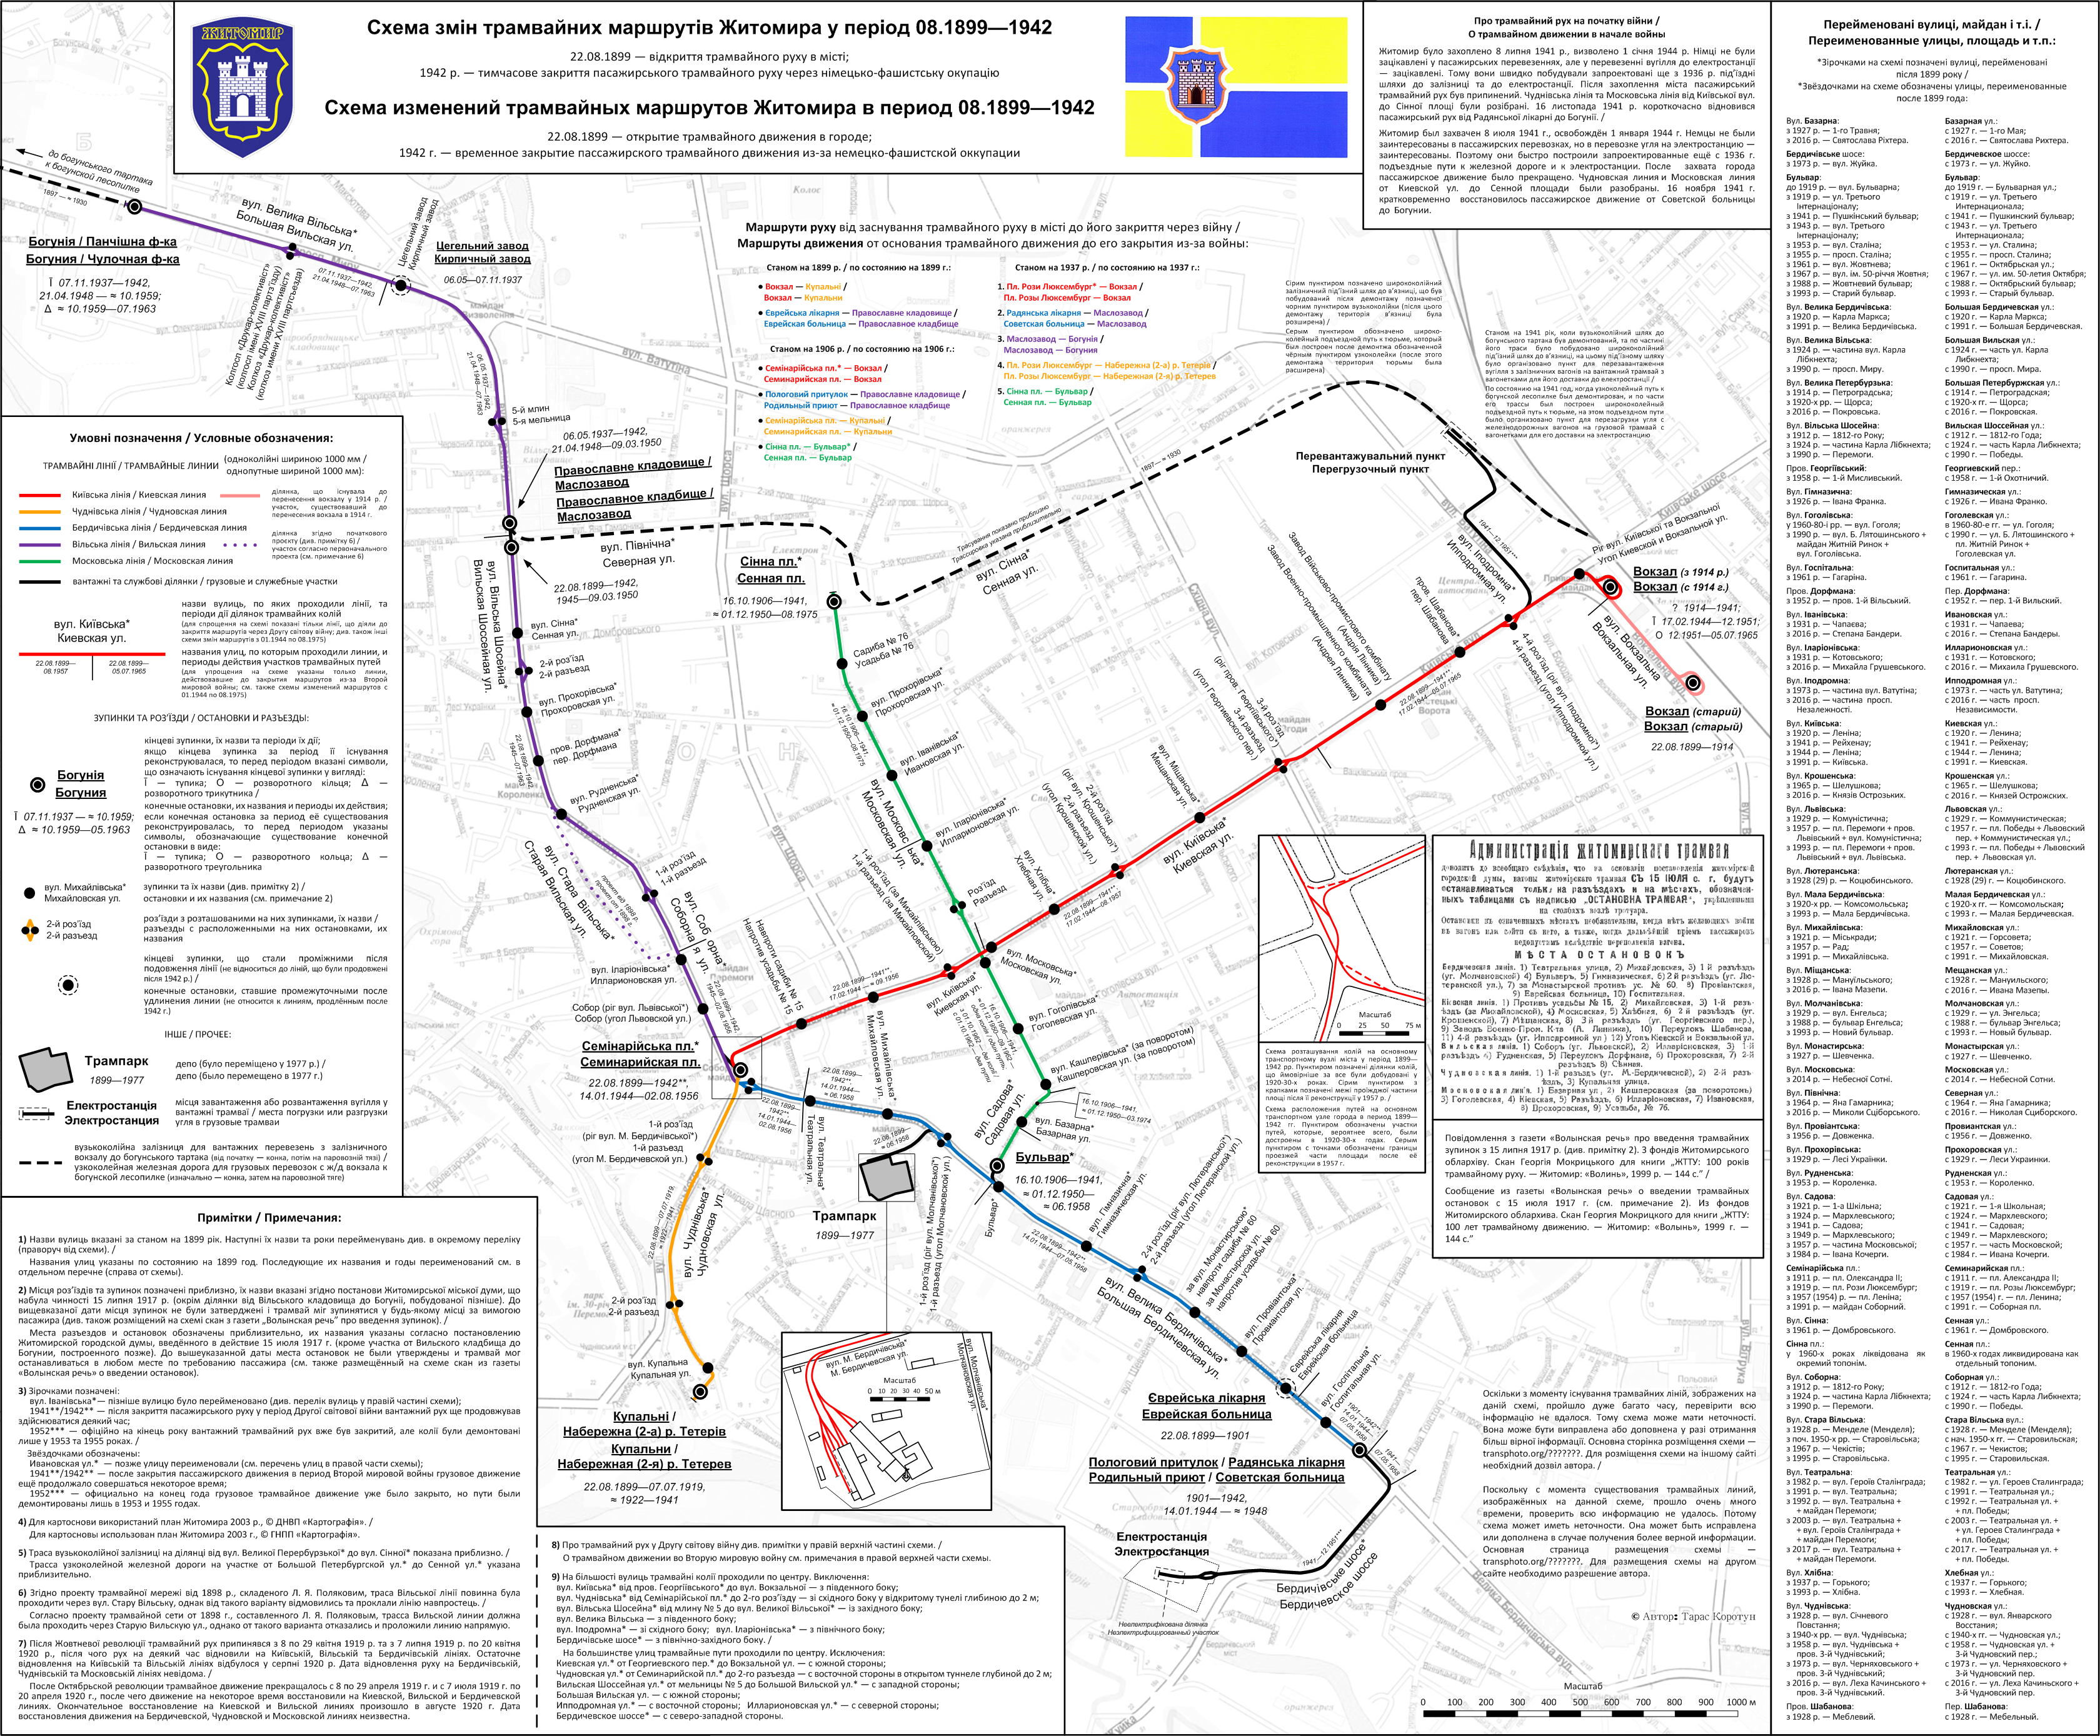 Žytomyr — Maps of changes in the tram network in the 1899—1975